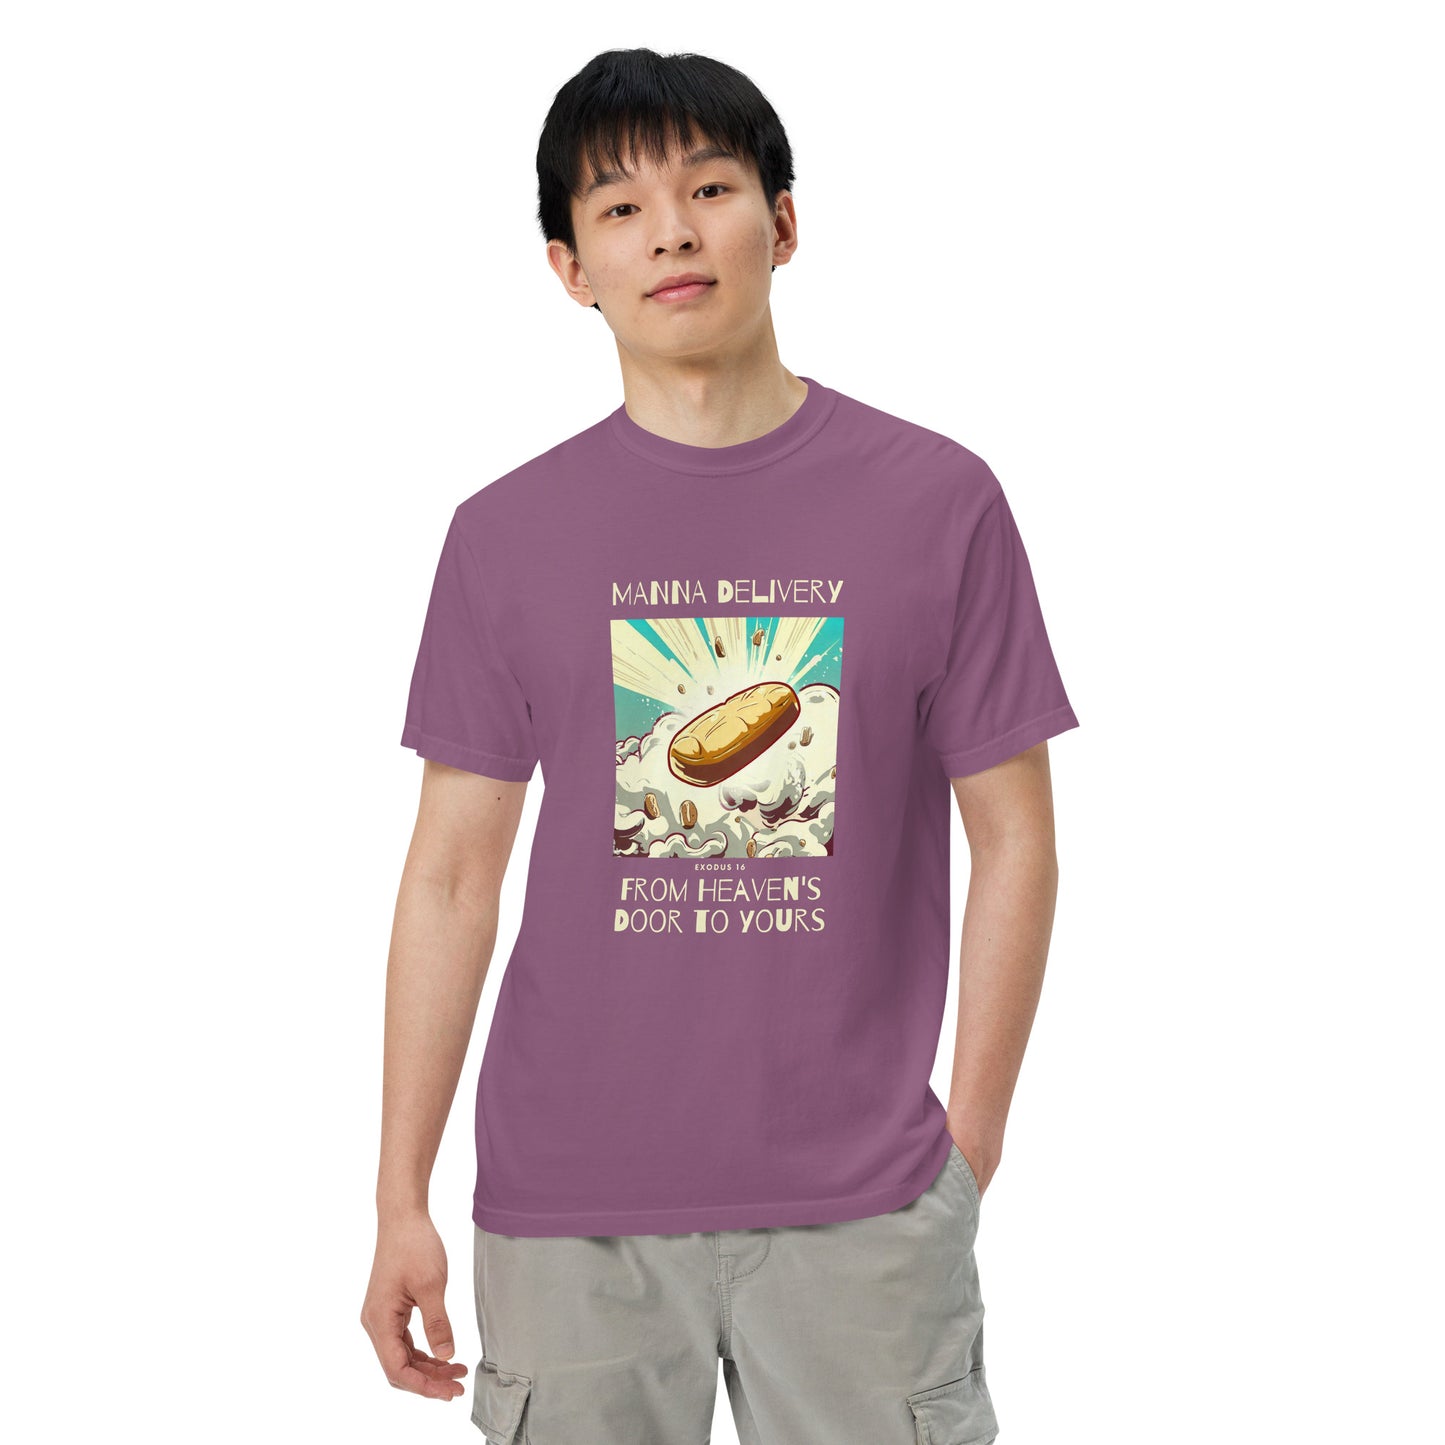 Manna Delivery "From Heaven's Door to Yours" (Yellow Print) Men’s Comfort Colors T-Shirt